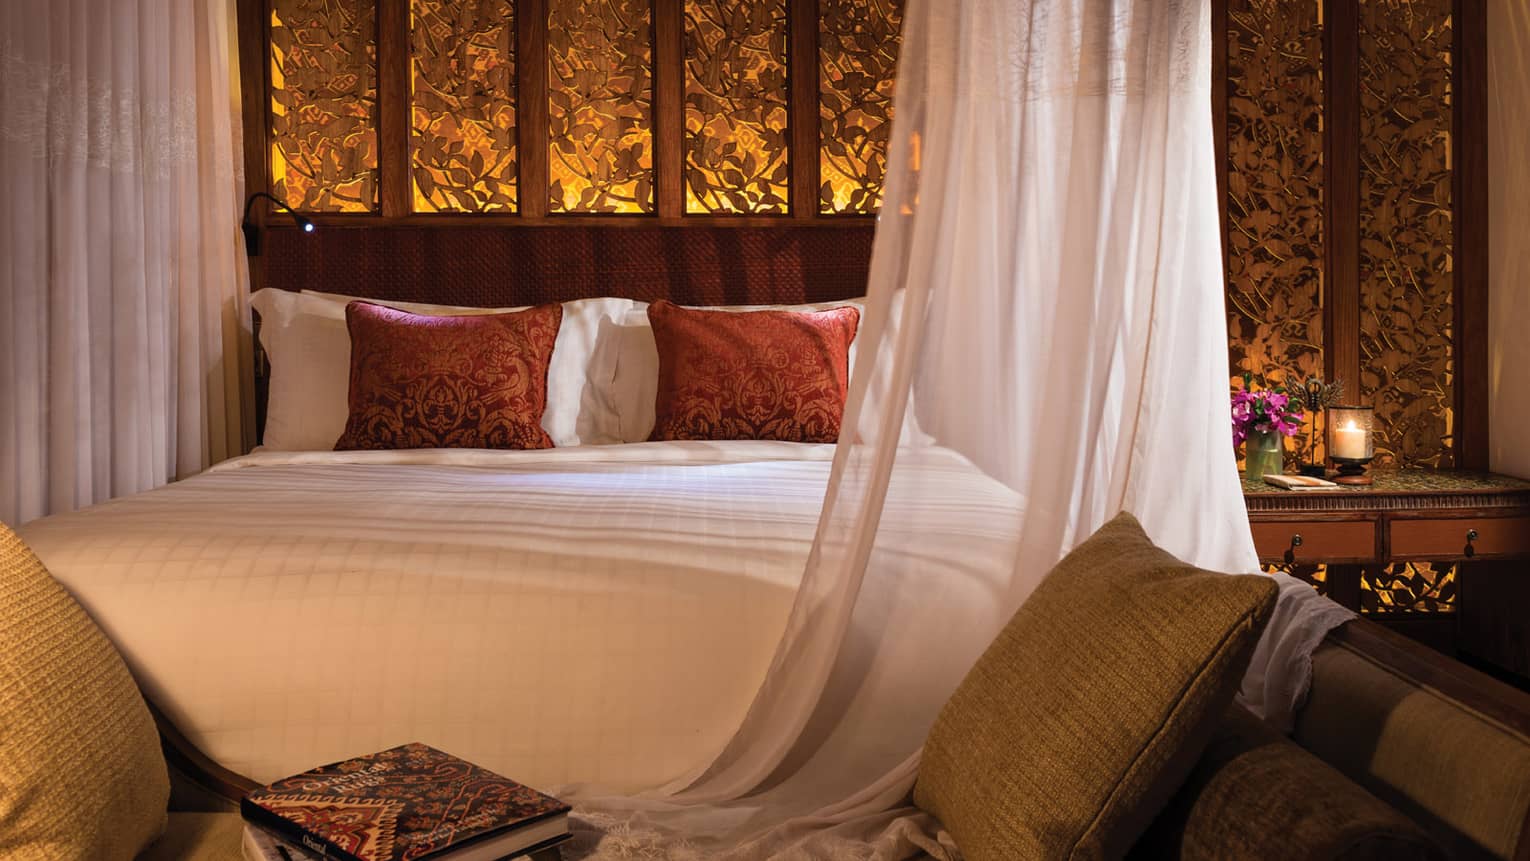 Close-up of dimly-lit bedroom, bed with white linens and burgundy pillows, illuminated floral wall behind headboard